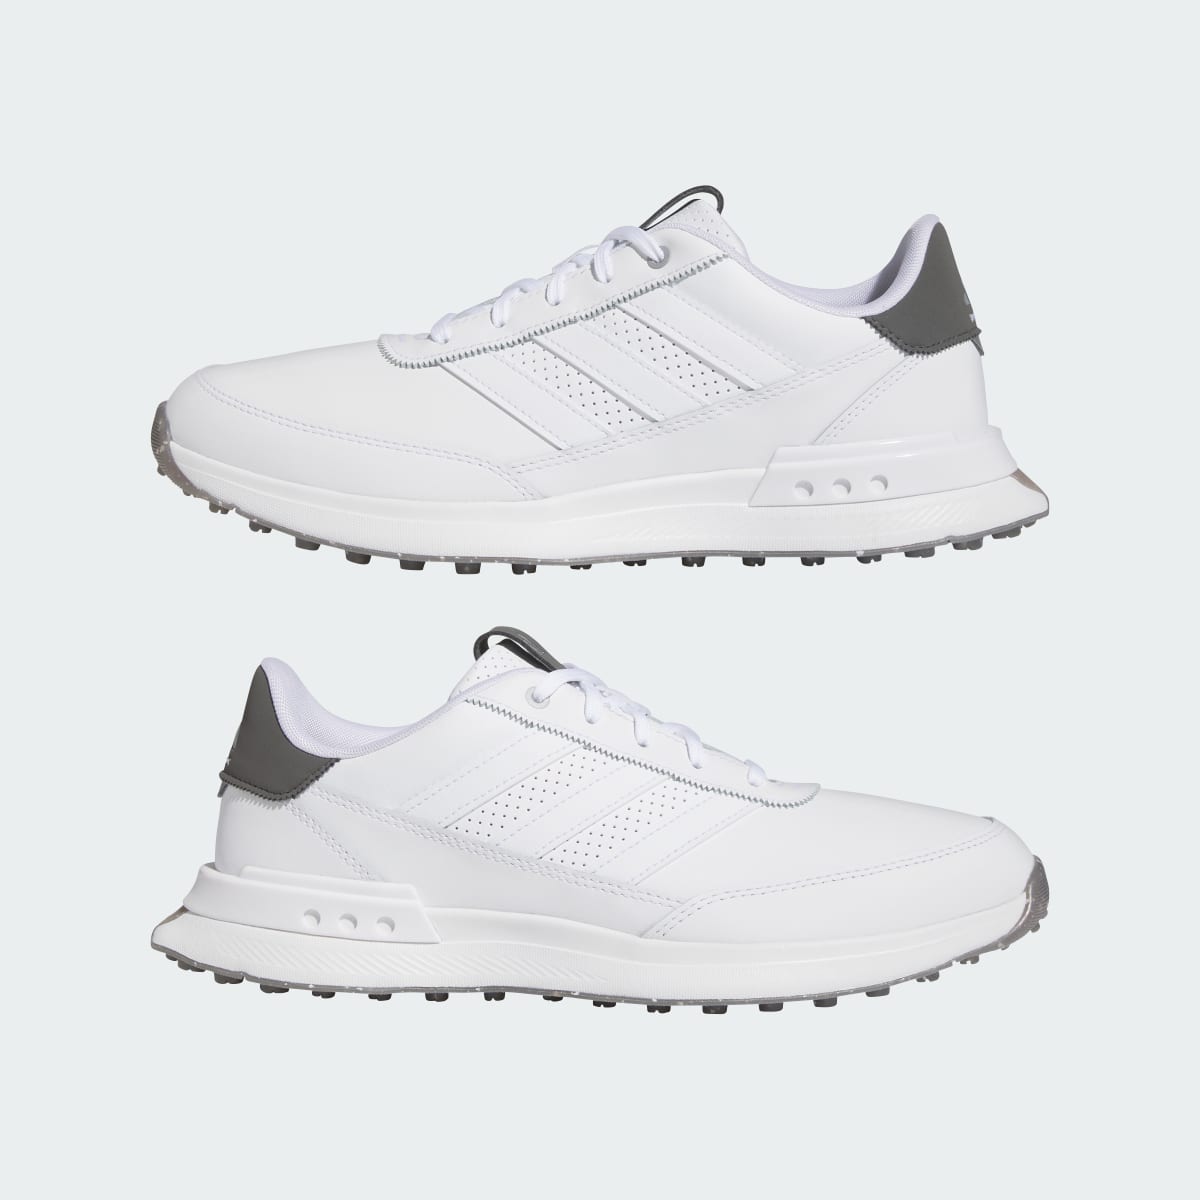 Adidas S2G 24 Leather Spikeless Golf Shoes. 11